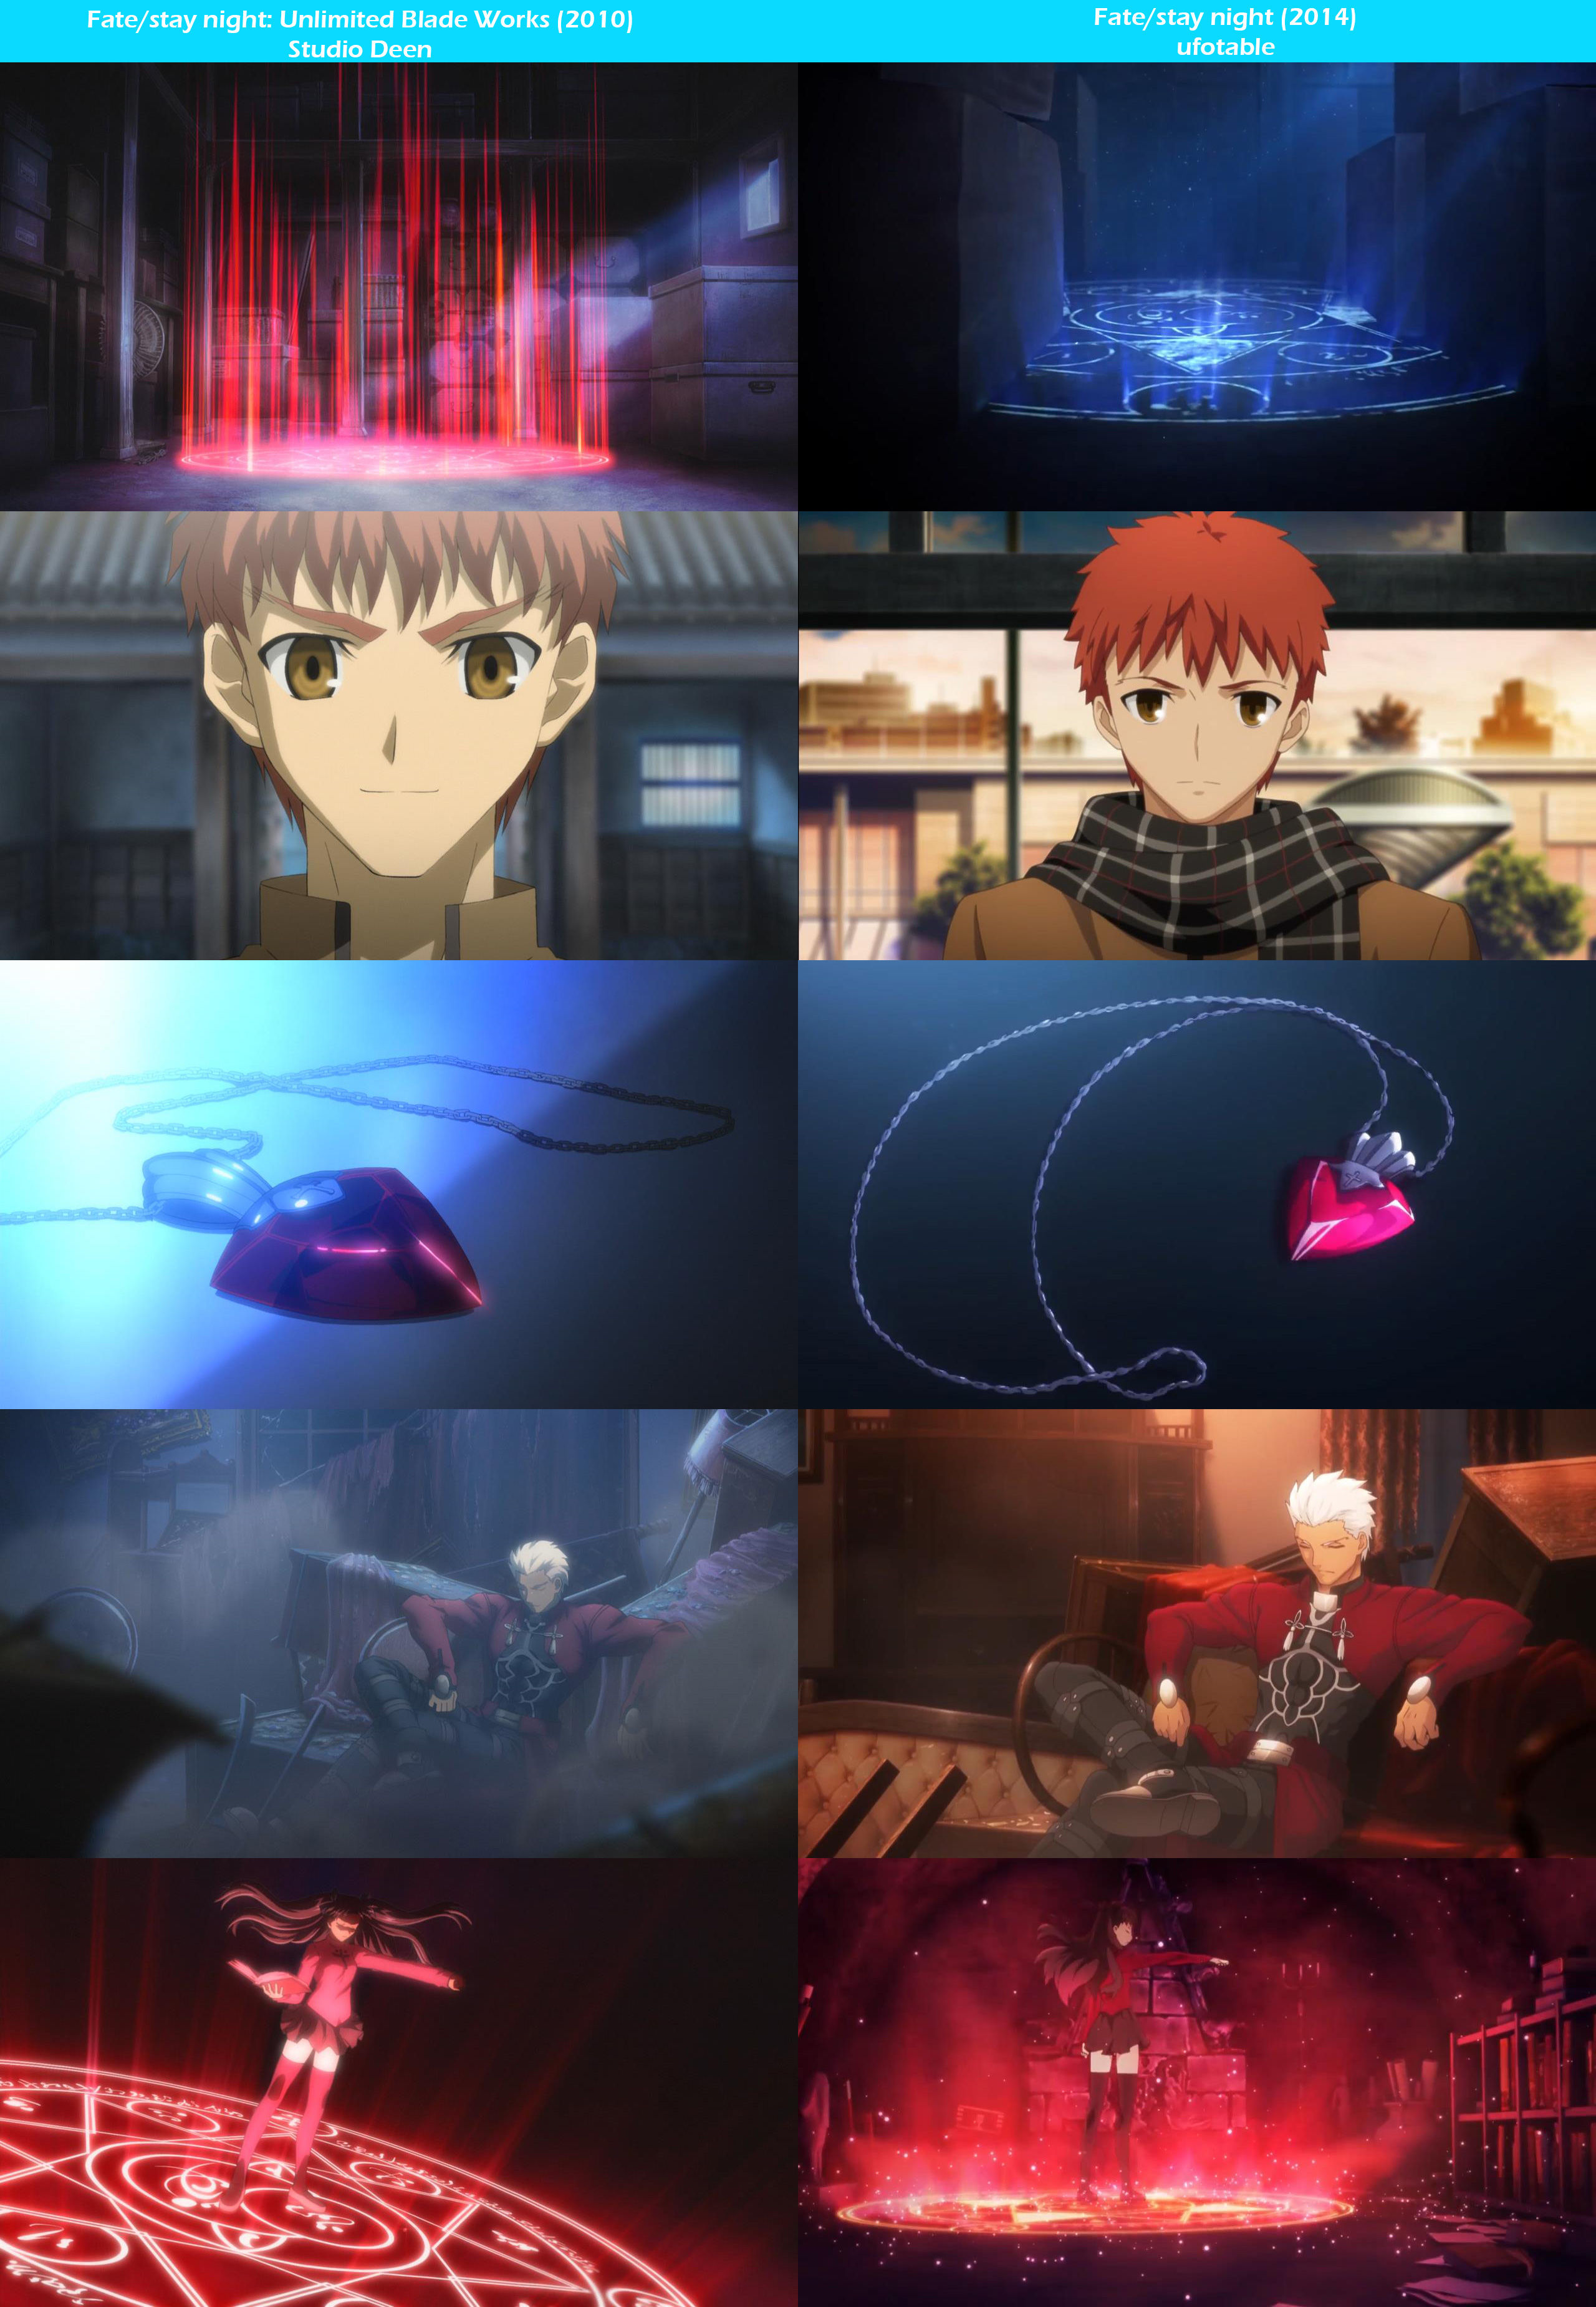 Fate-stay-night-Unlimited-Blade-Works-Comparison-1